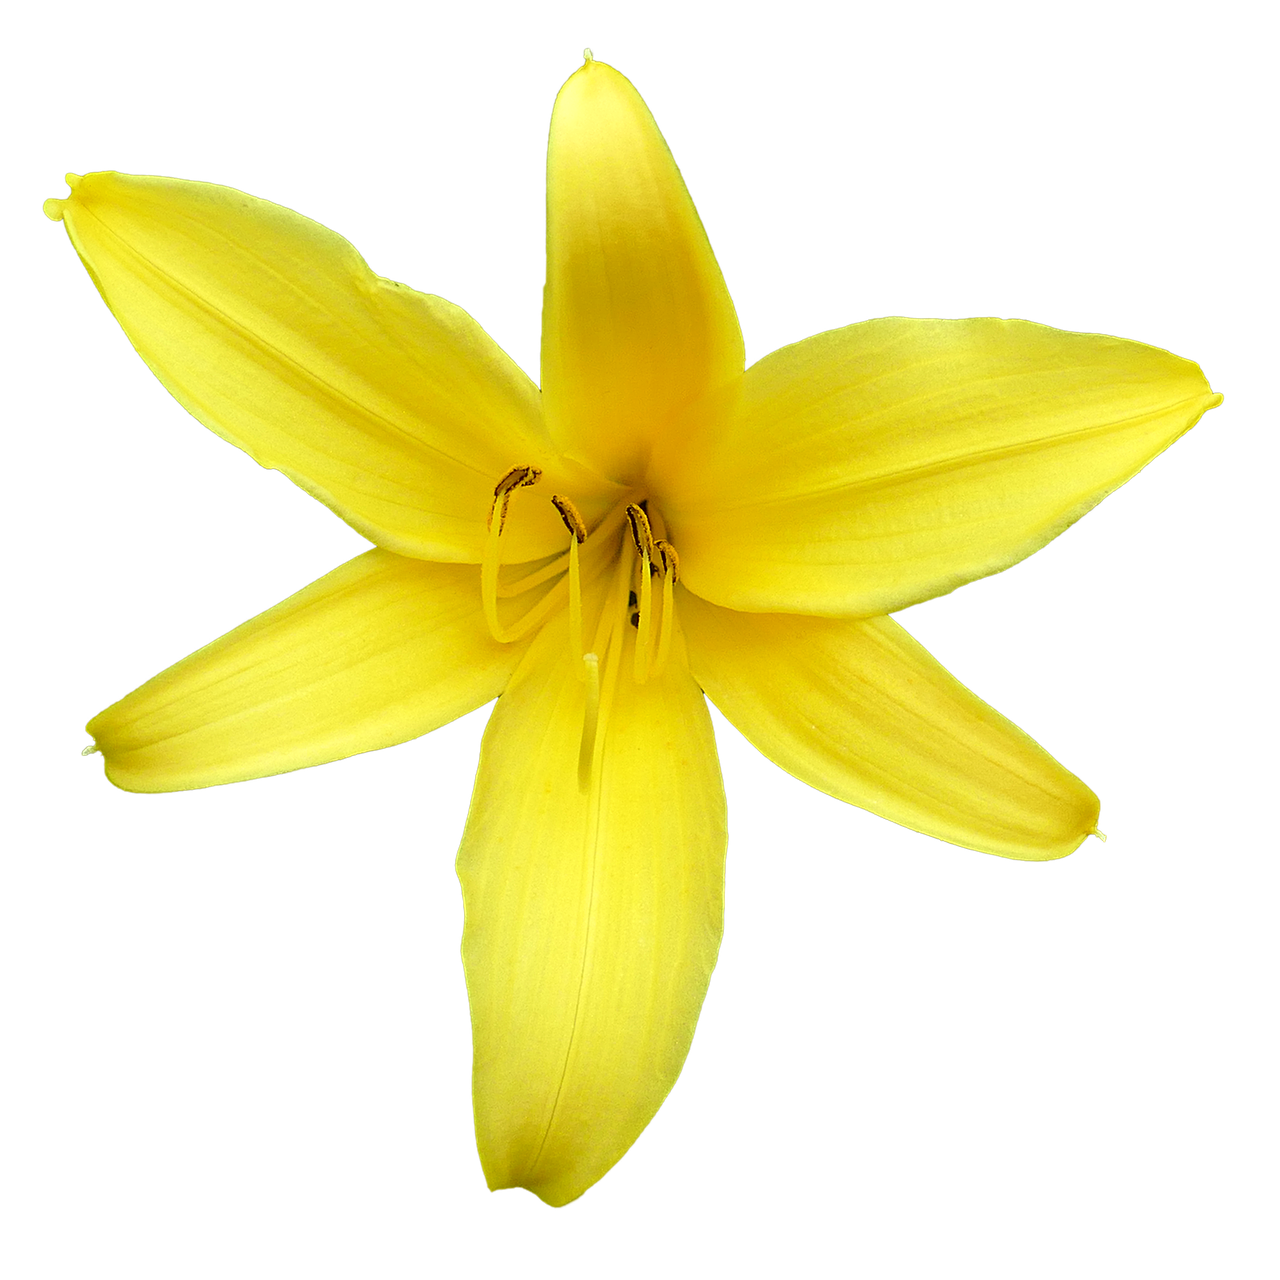 lily blossom flower yellow free photo